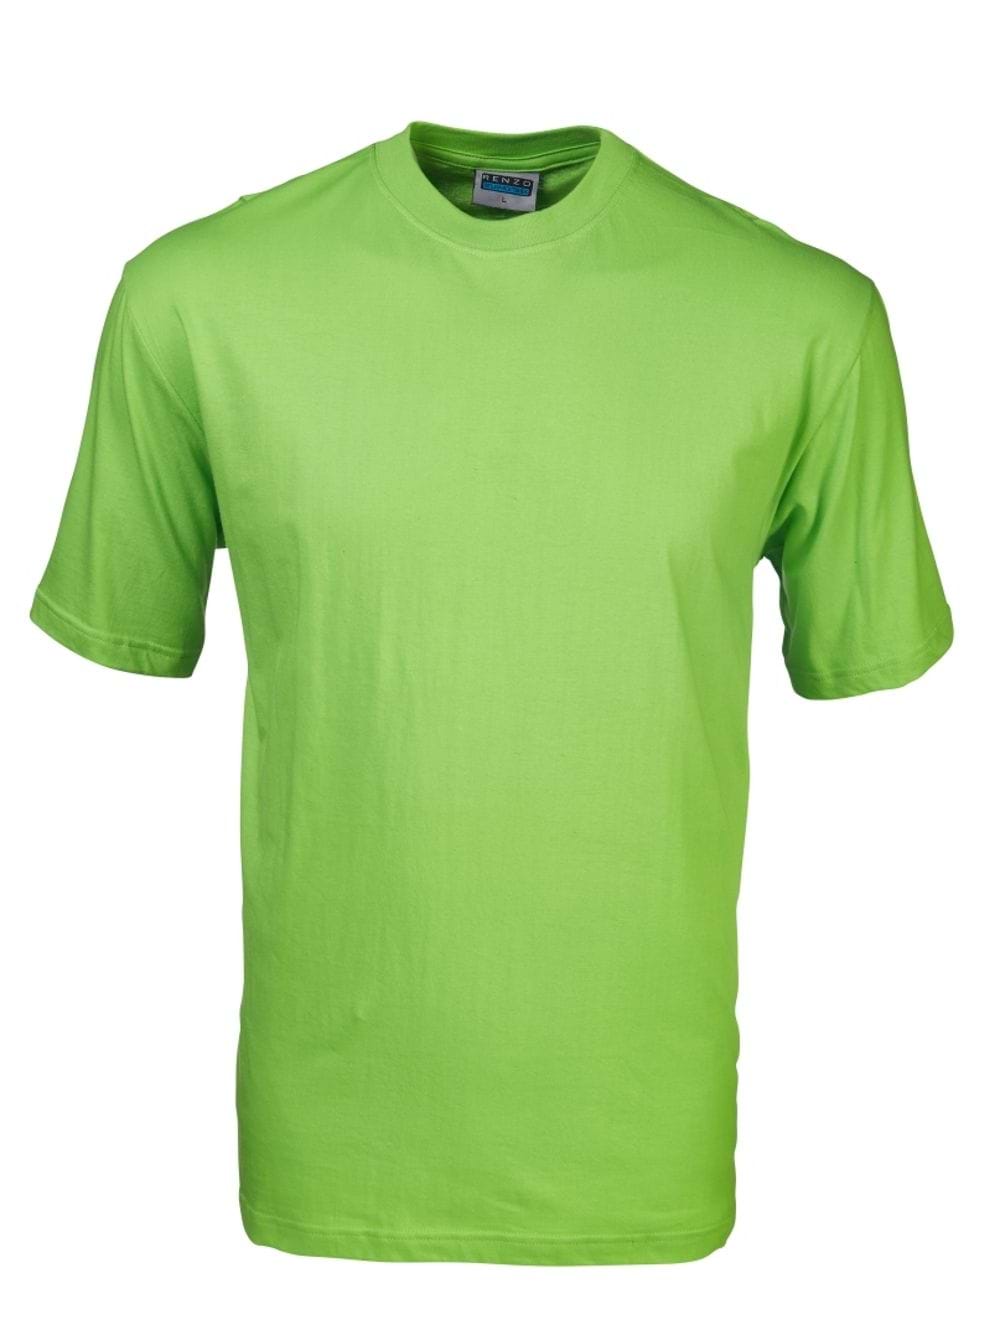 165G Crew Neck T-Shirt - Lime Green / S